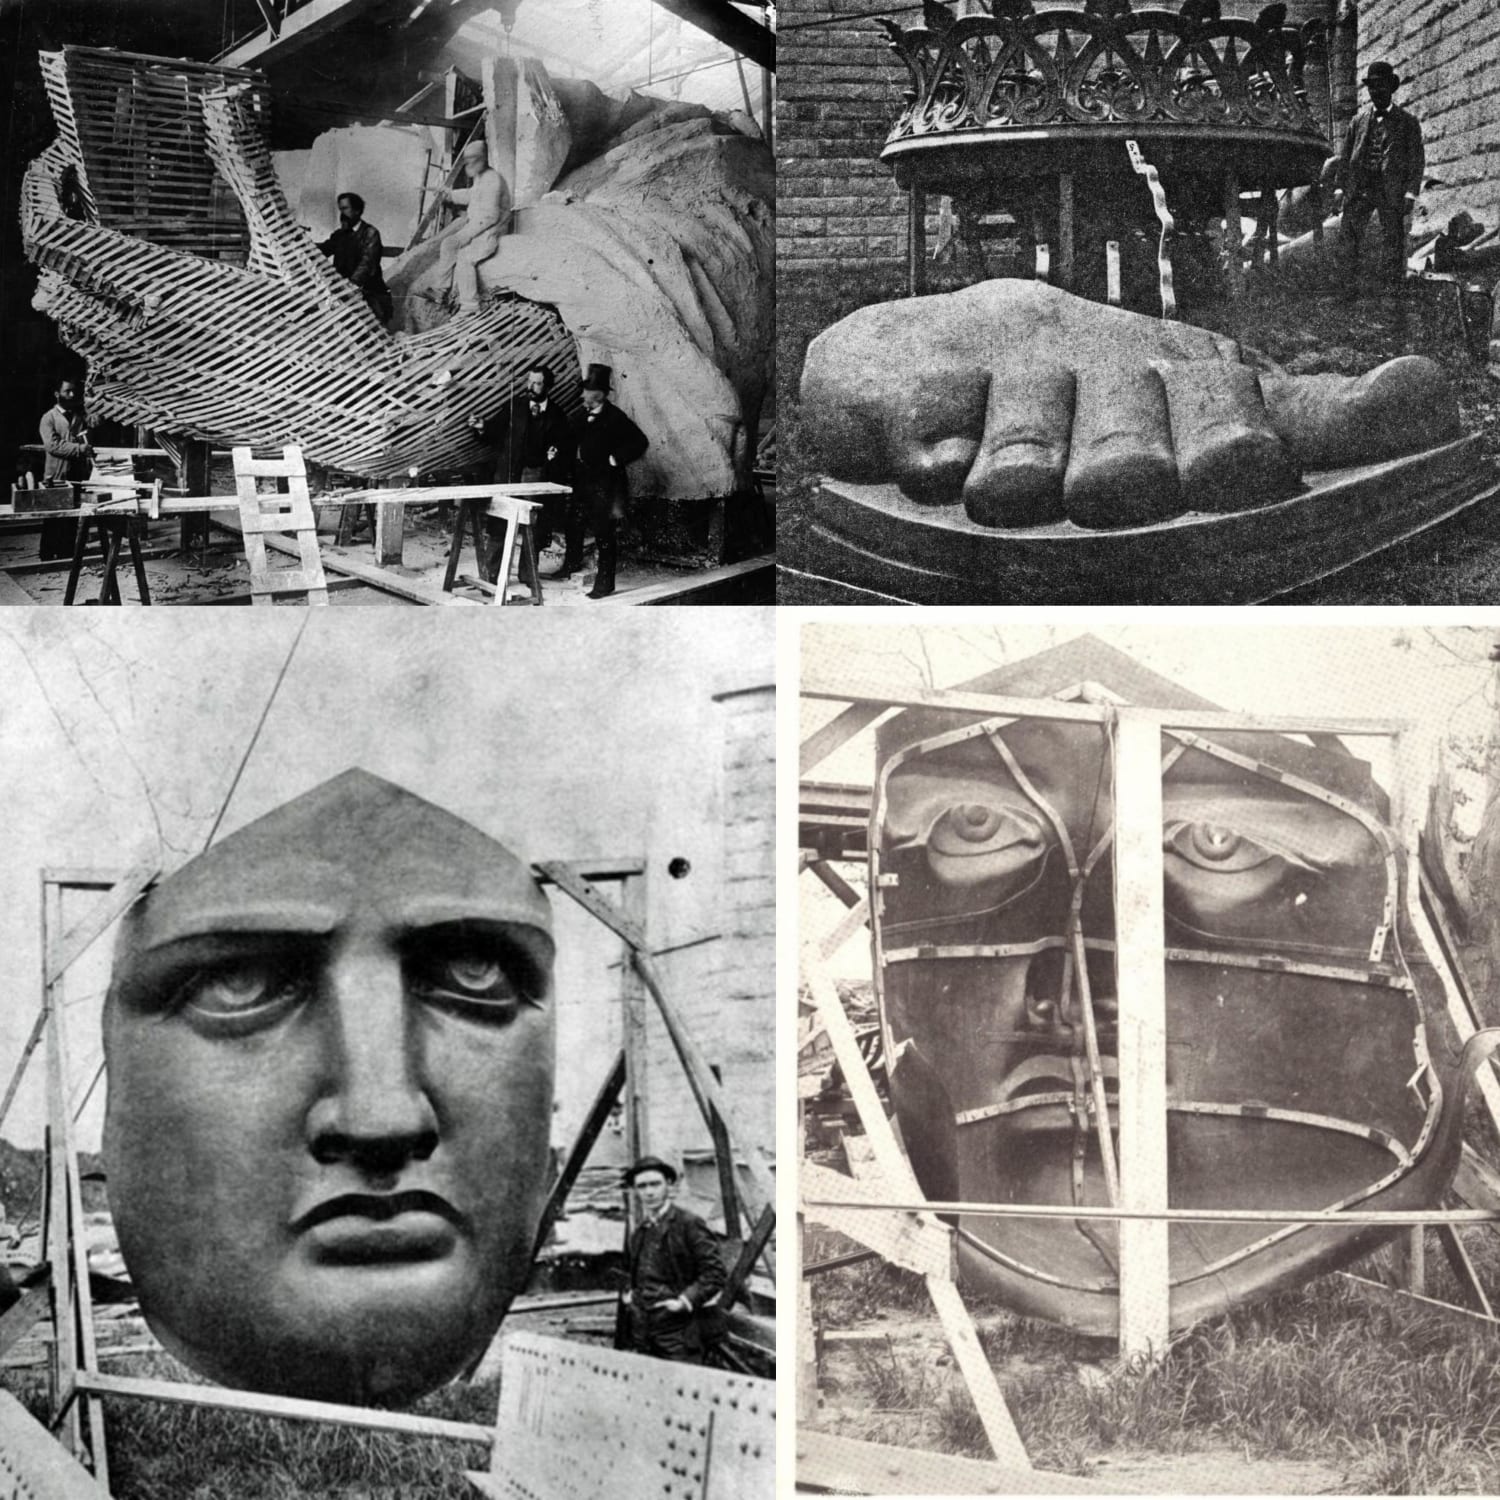 Assembly of the Statue of Liberty. Well the individual parts creep me out